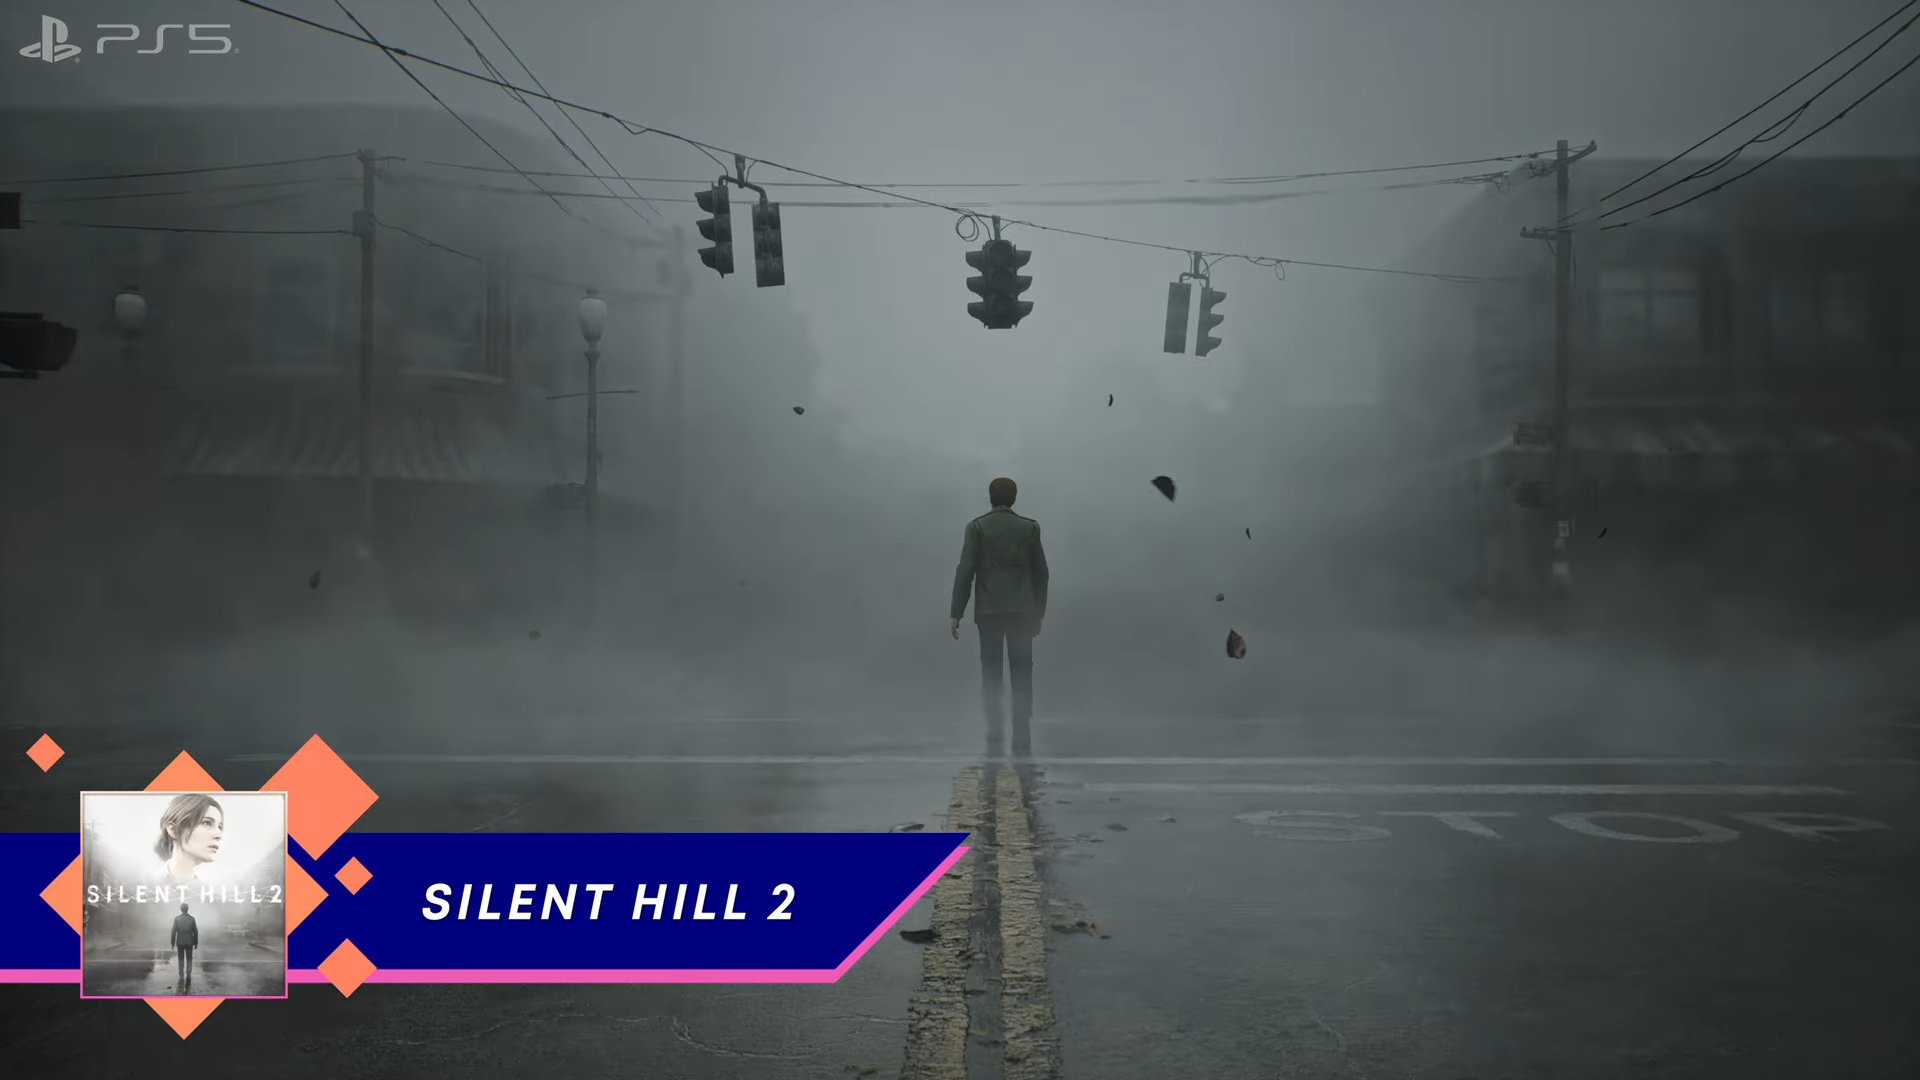 SILENT HILL 2 PS5